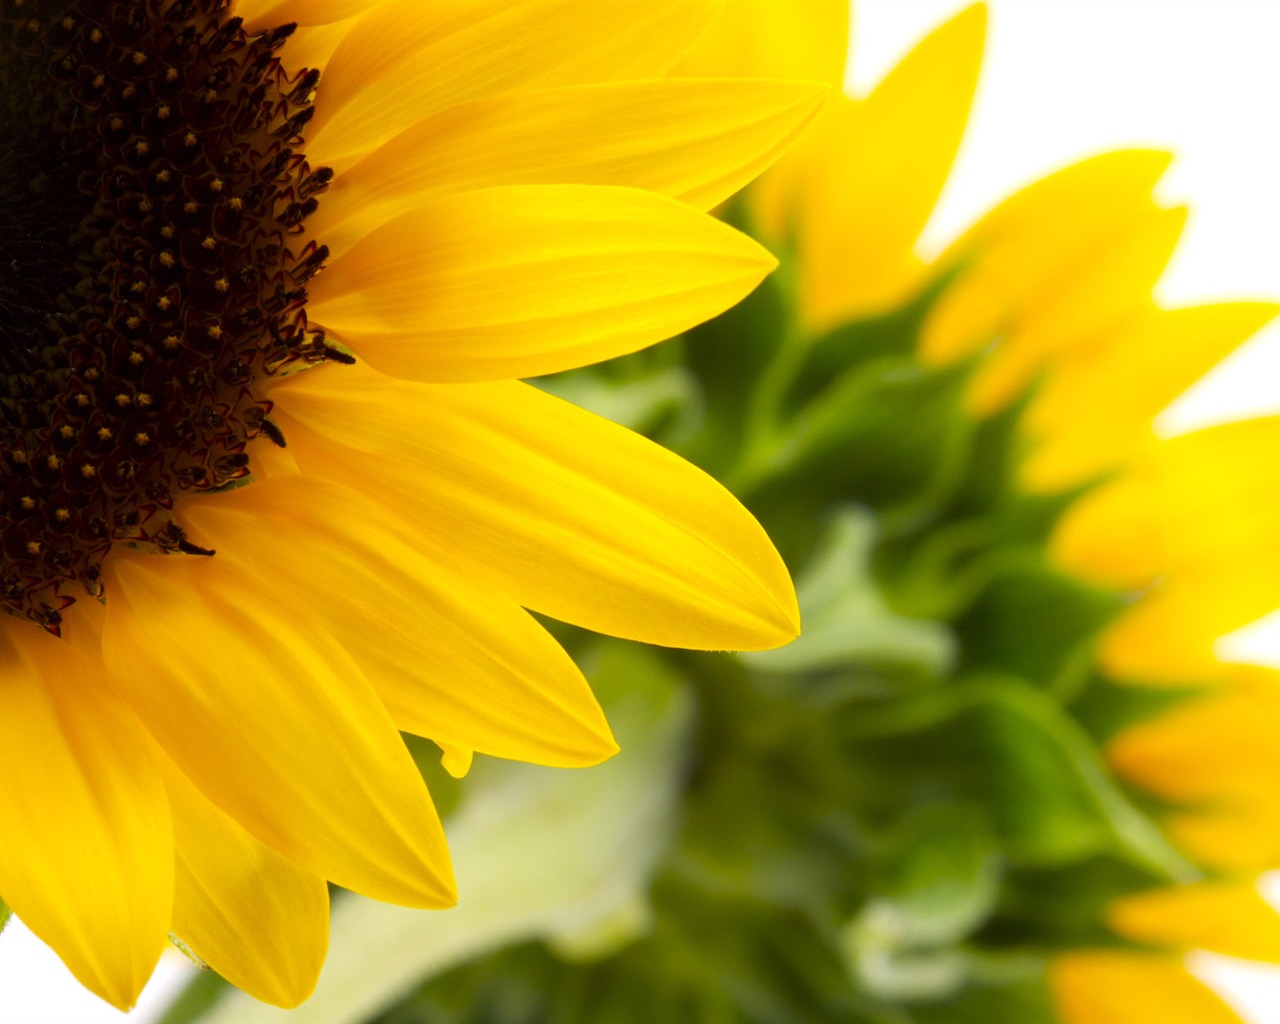 Sunny sunflower photo HD Wallpapers #26 - 1280x1024